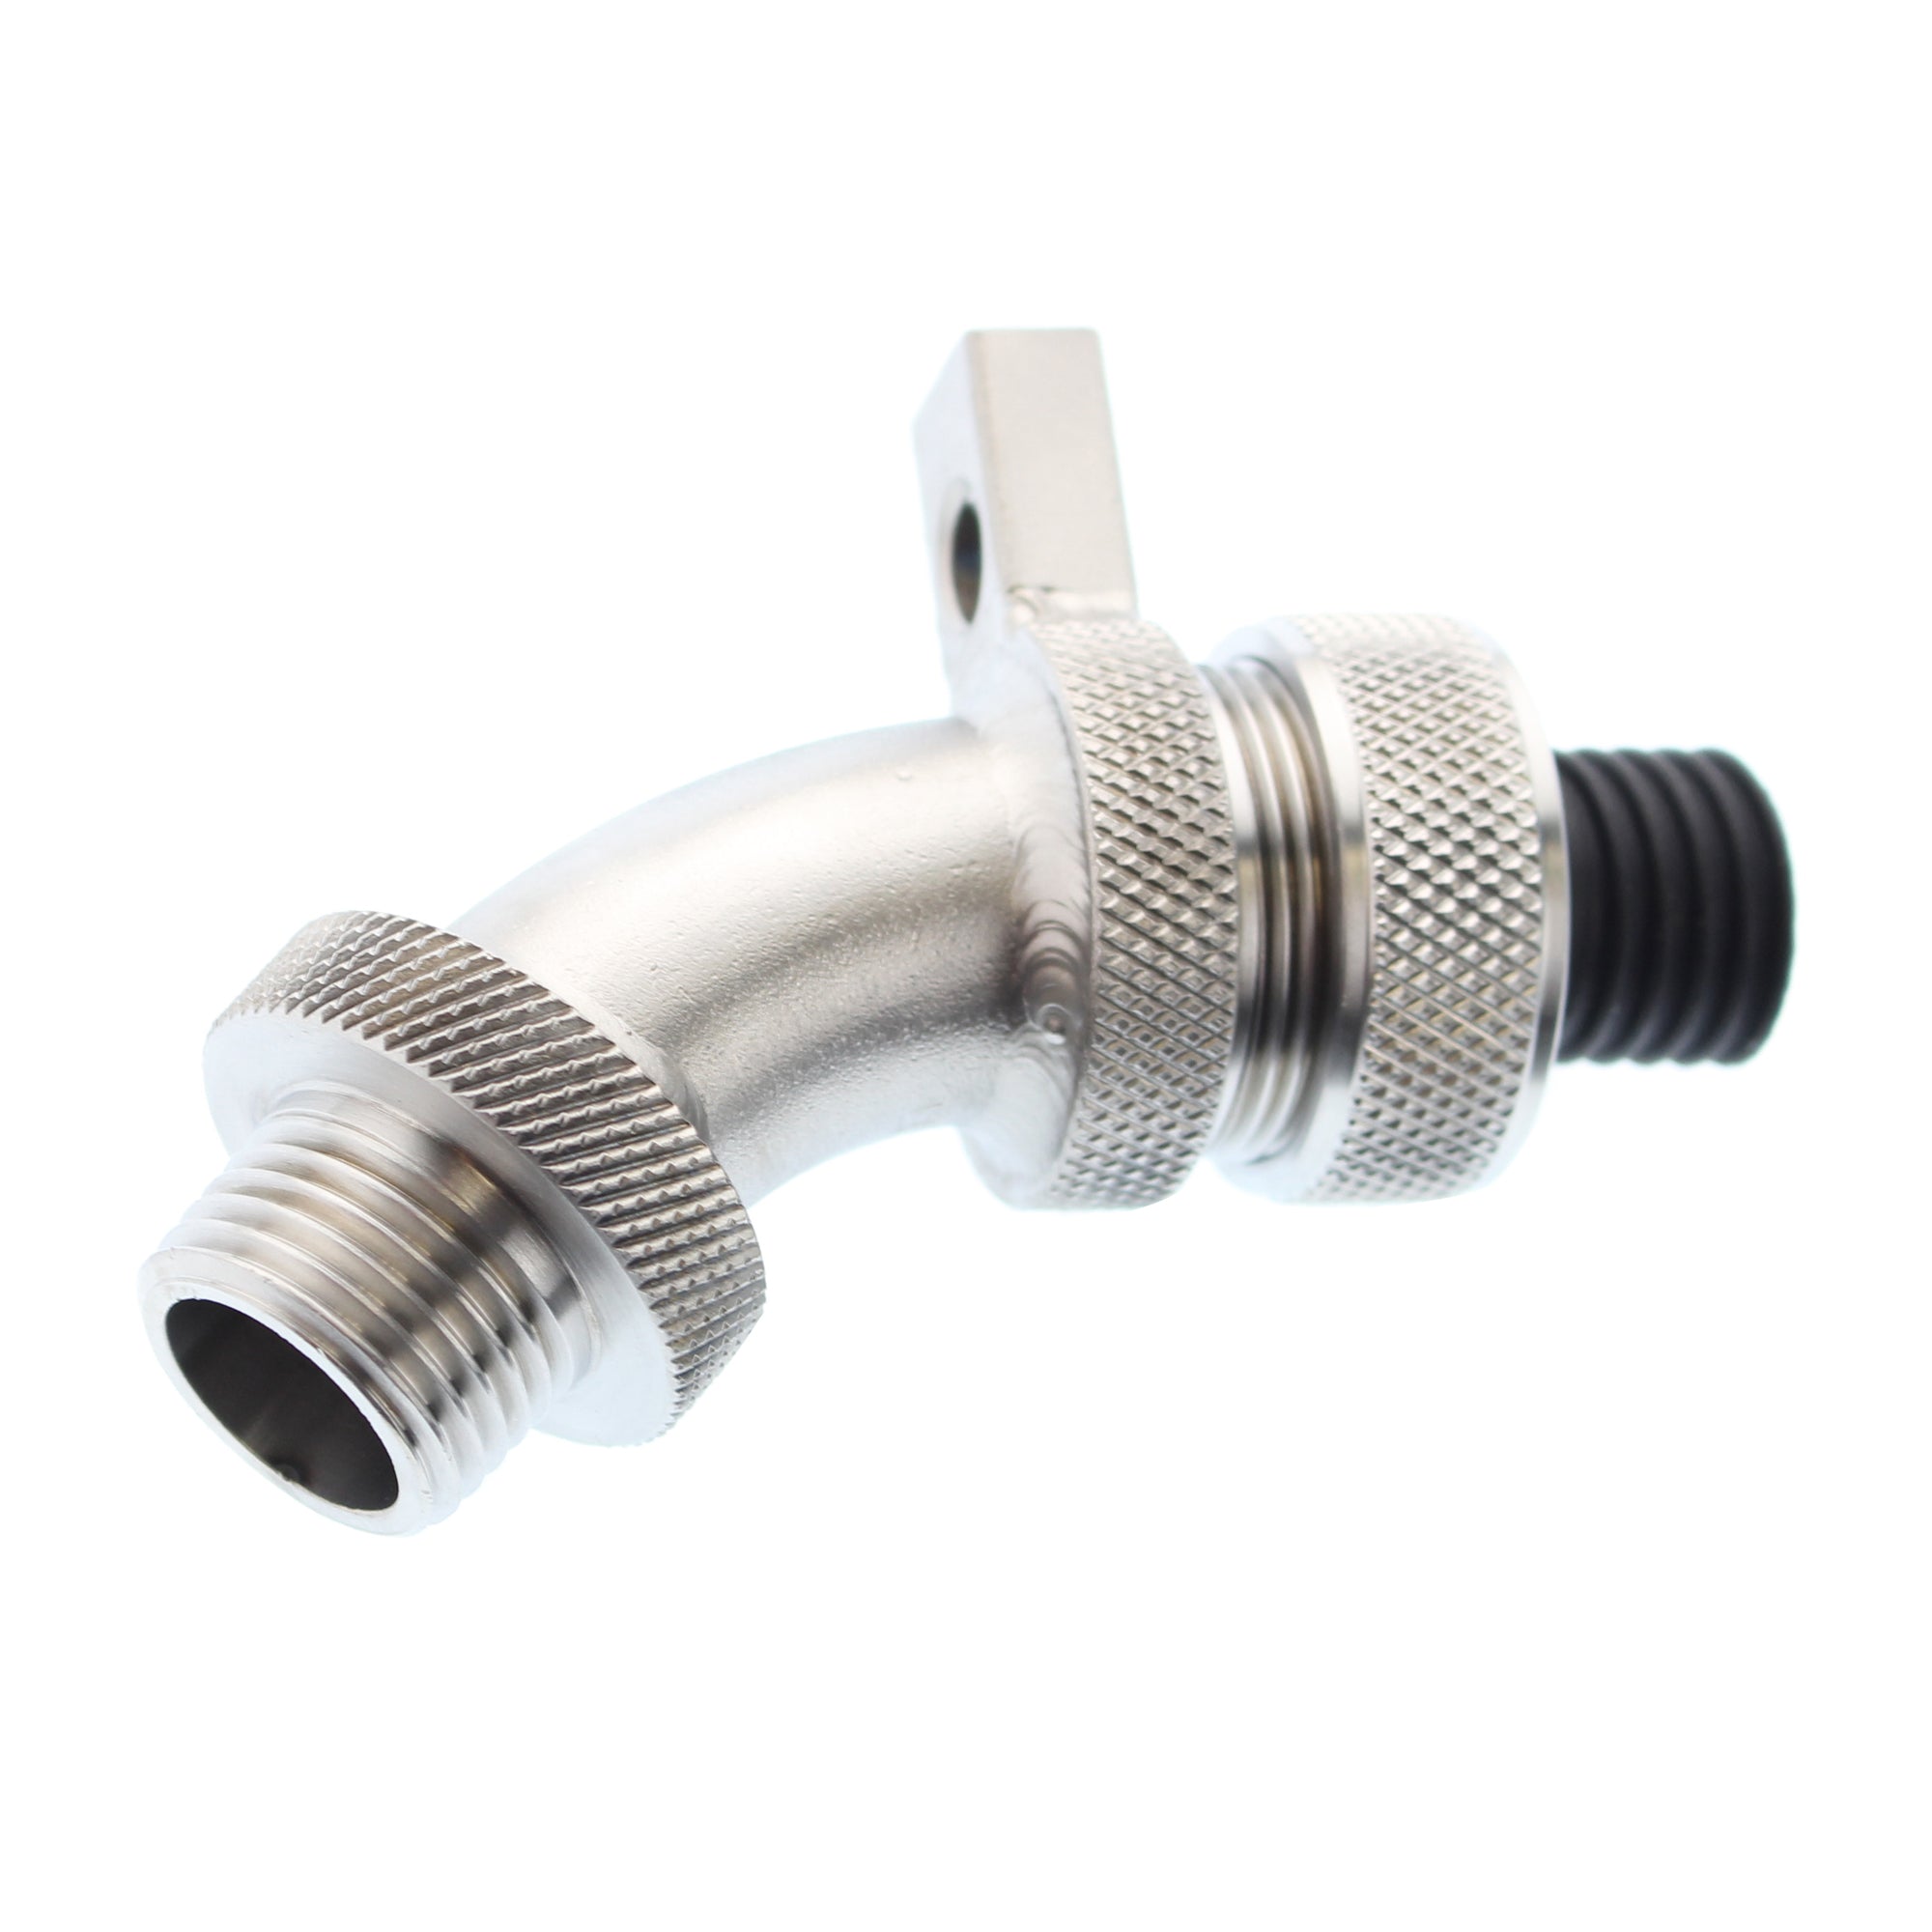 Boaflex, AMERICANBOA BOAFLEX NBLC-050-03-MG-45 STAINLESS-STEEL CONDUIT CONNECTOR, 1/2"